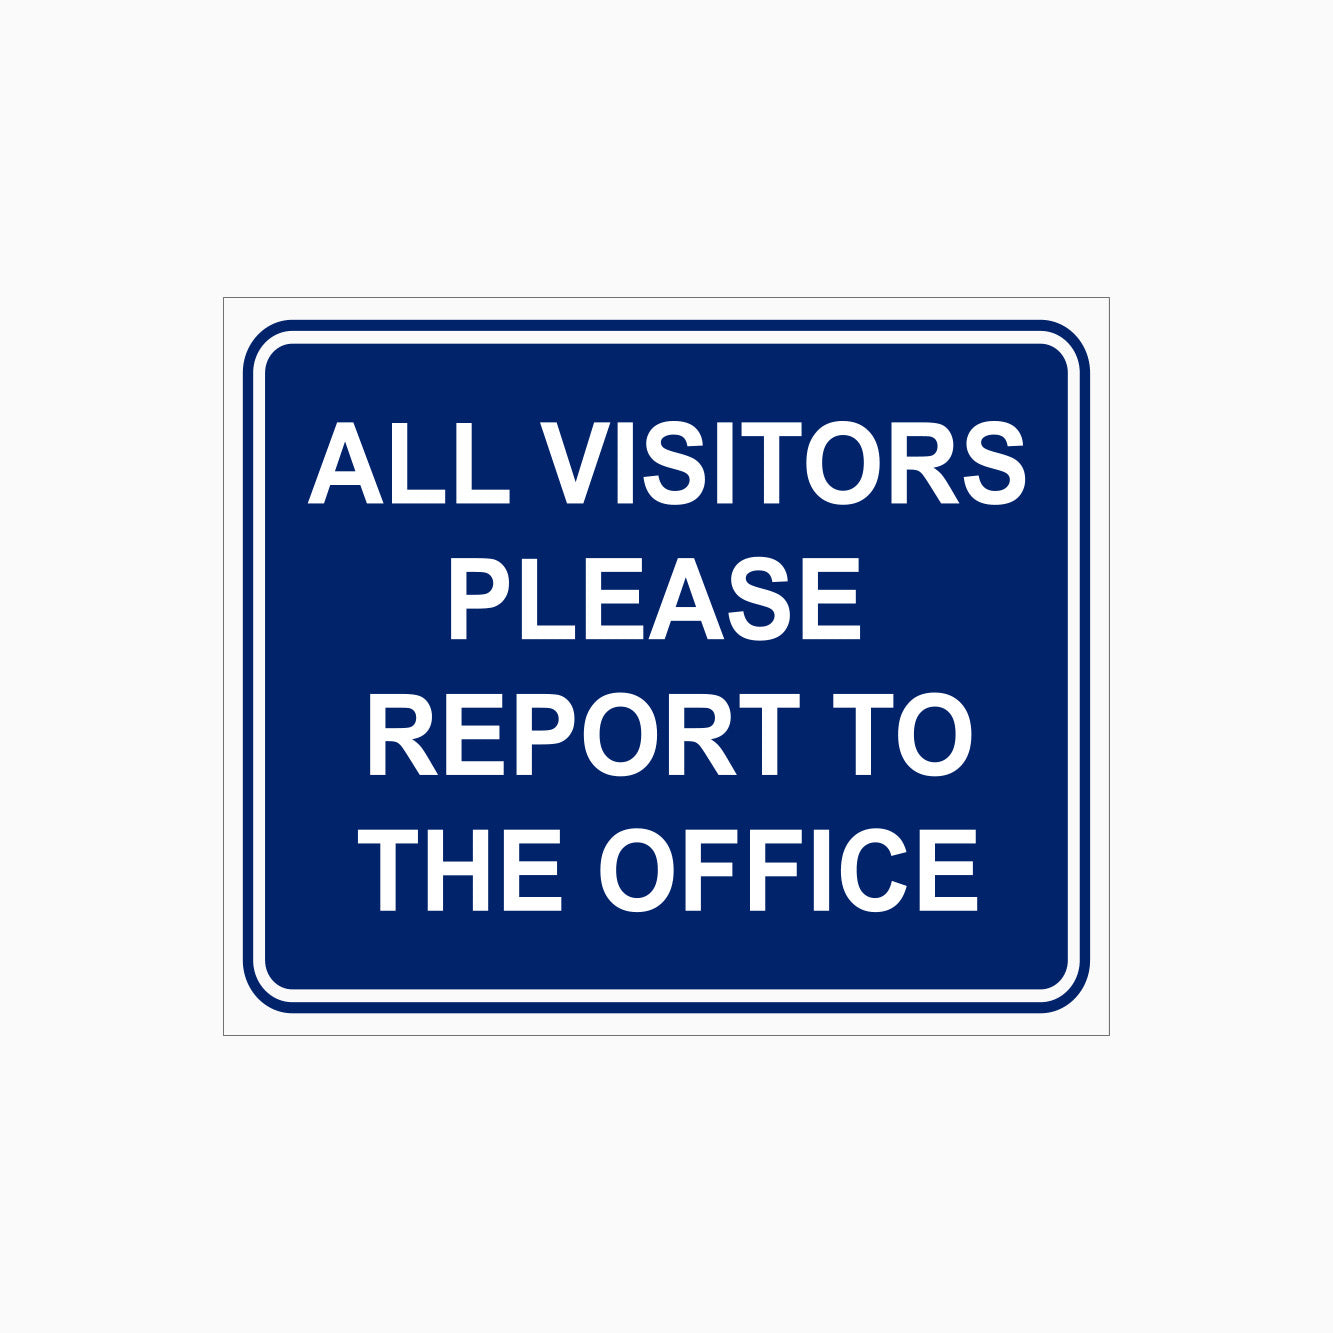 ALL VISITORS PLEASE REPORT TO THE OFFICE SIGN